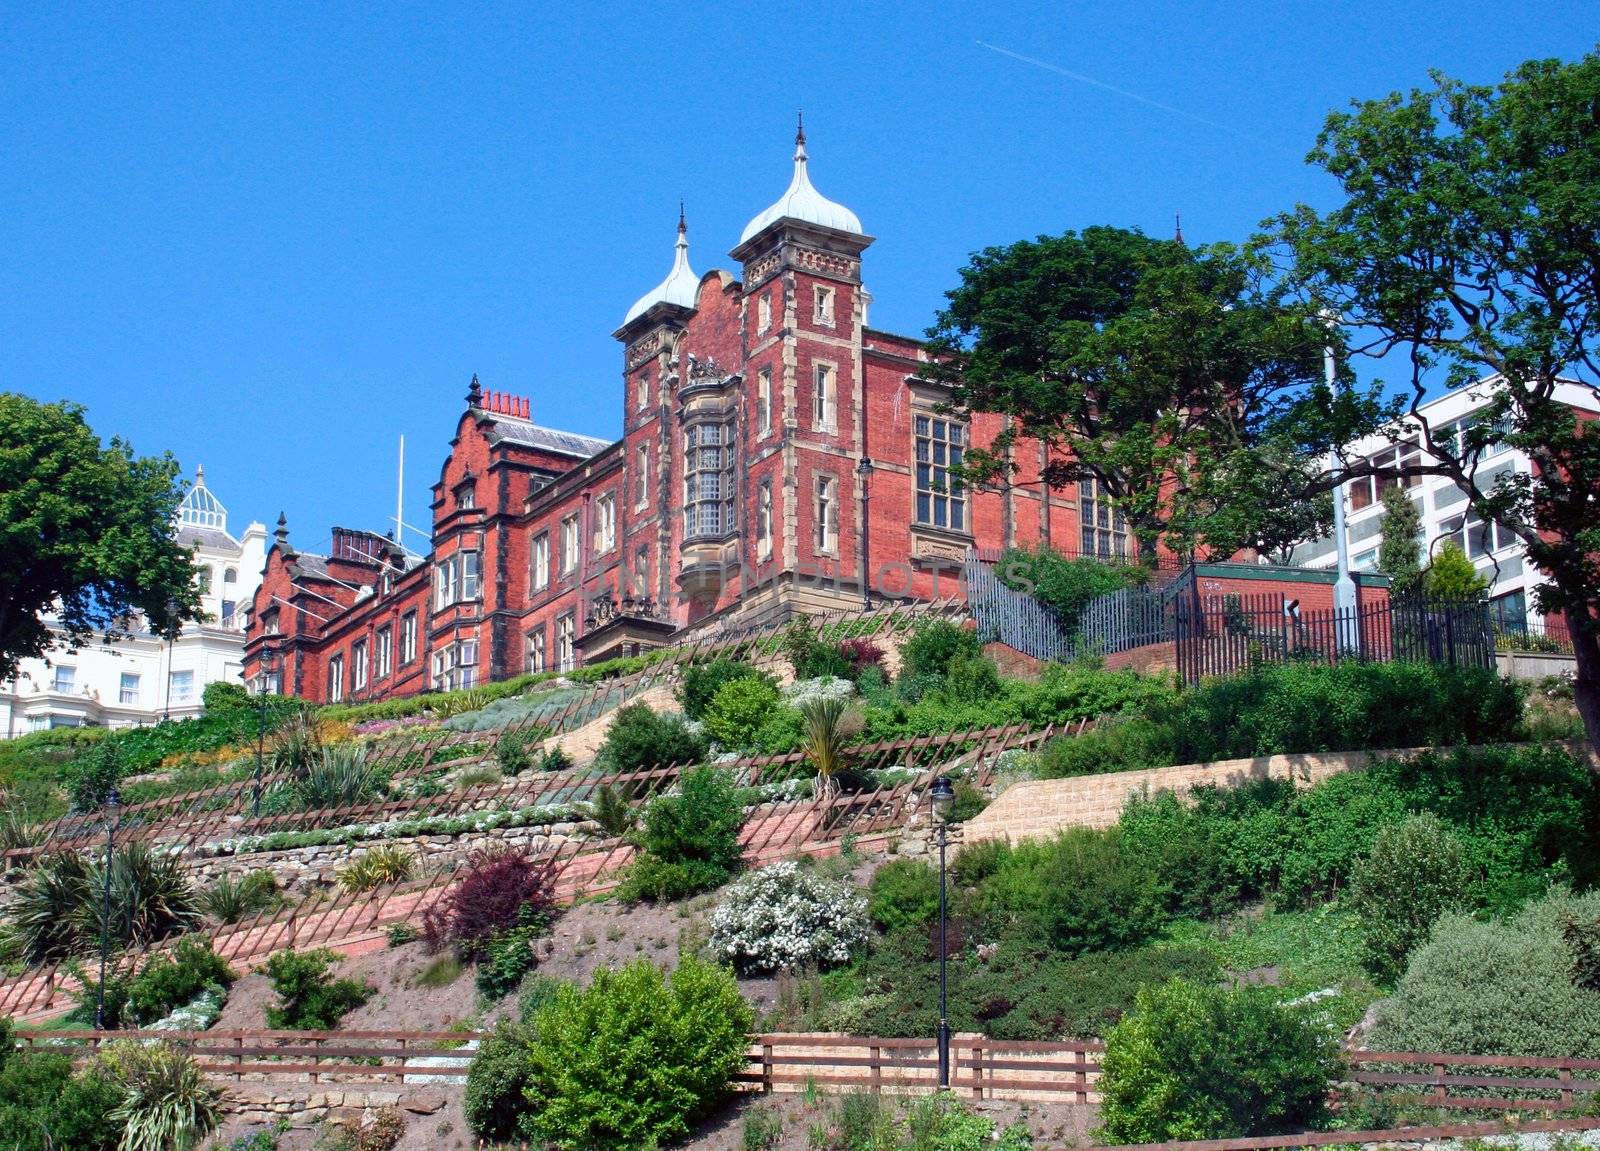 Civic town hall building in Scarborough, England.